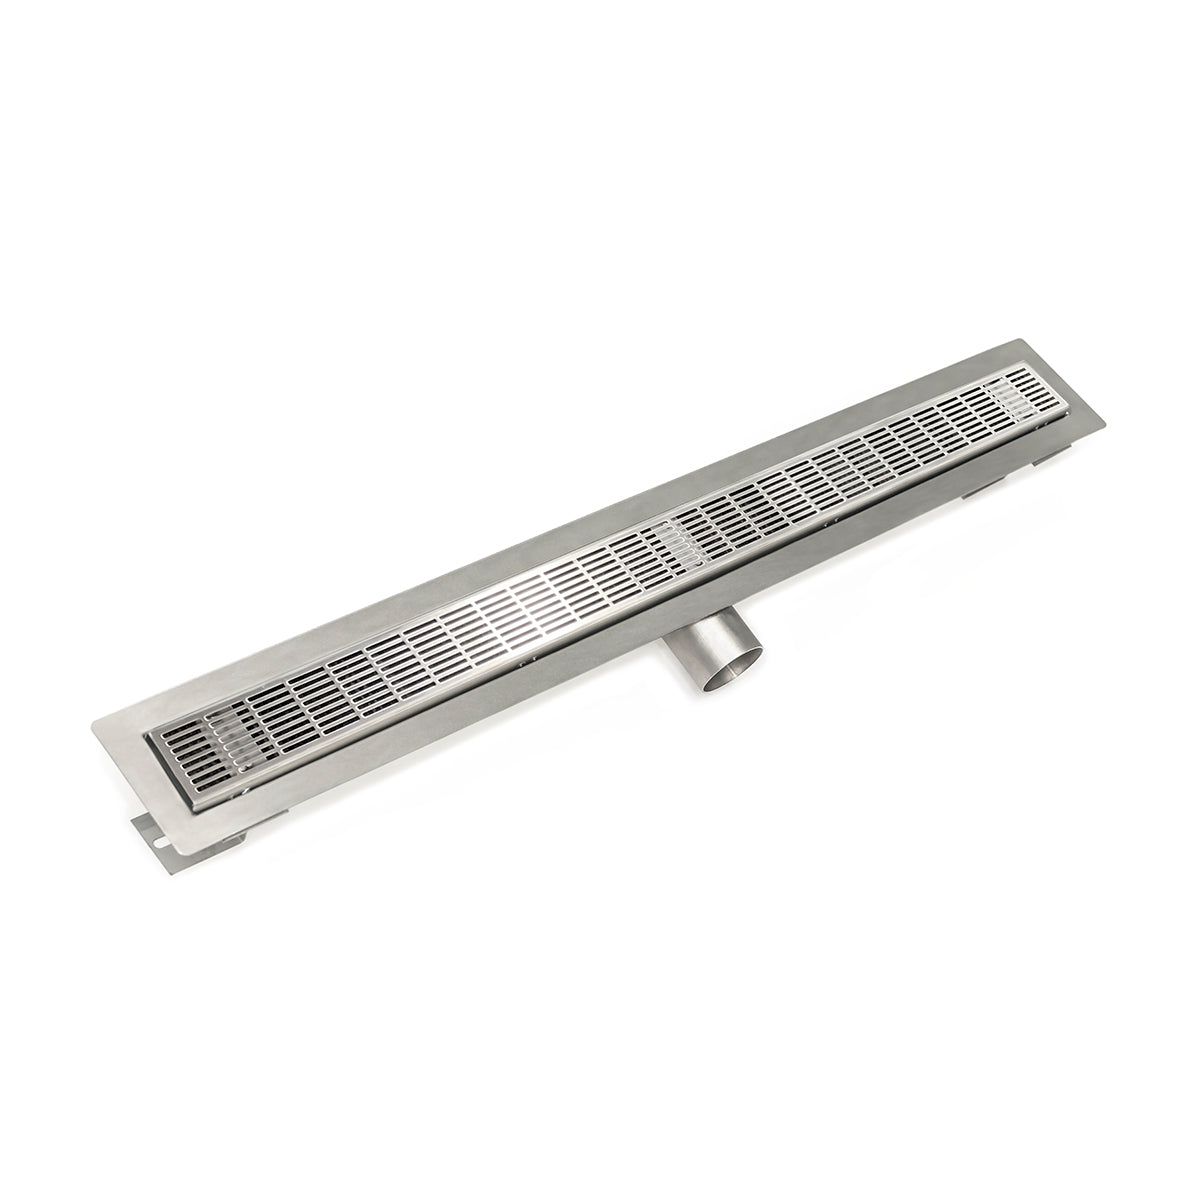 Infinity Drain 42" FT Series Side Outlet Linear Drain Kit with 2 1/2" Perforated Slotted Grate